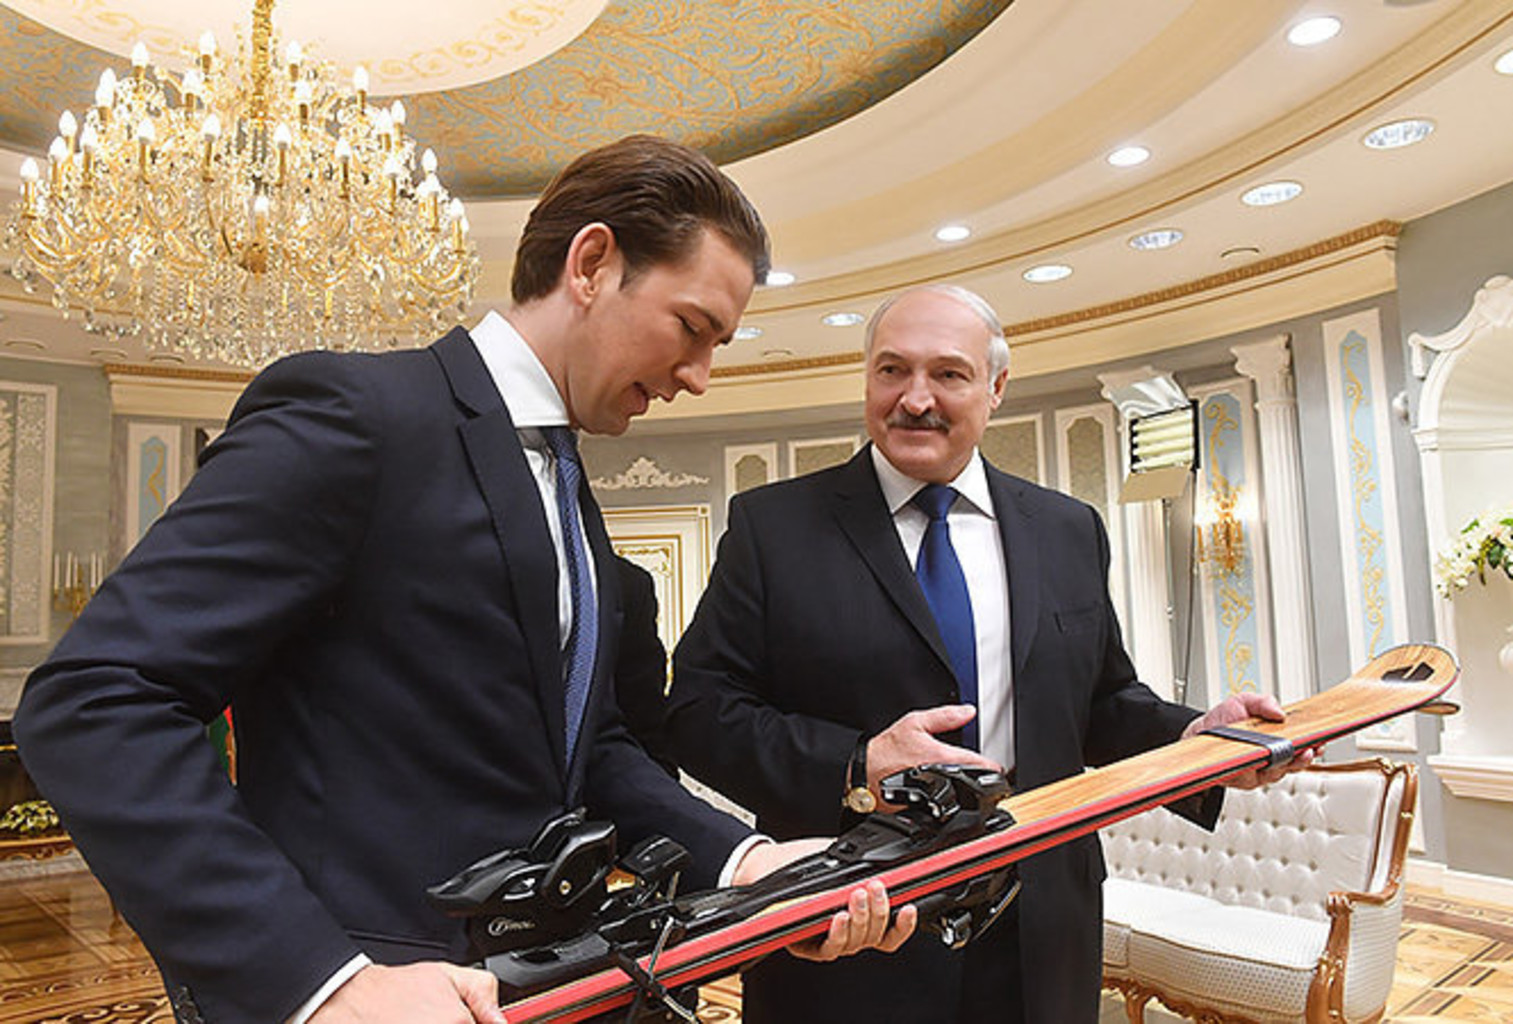 Kurz’s visit signals about the normalization with the West and the end of Belarus’s isolation